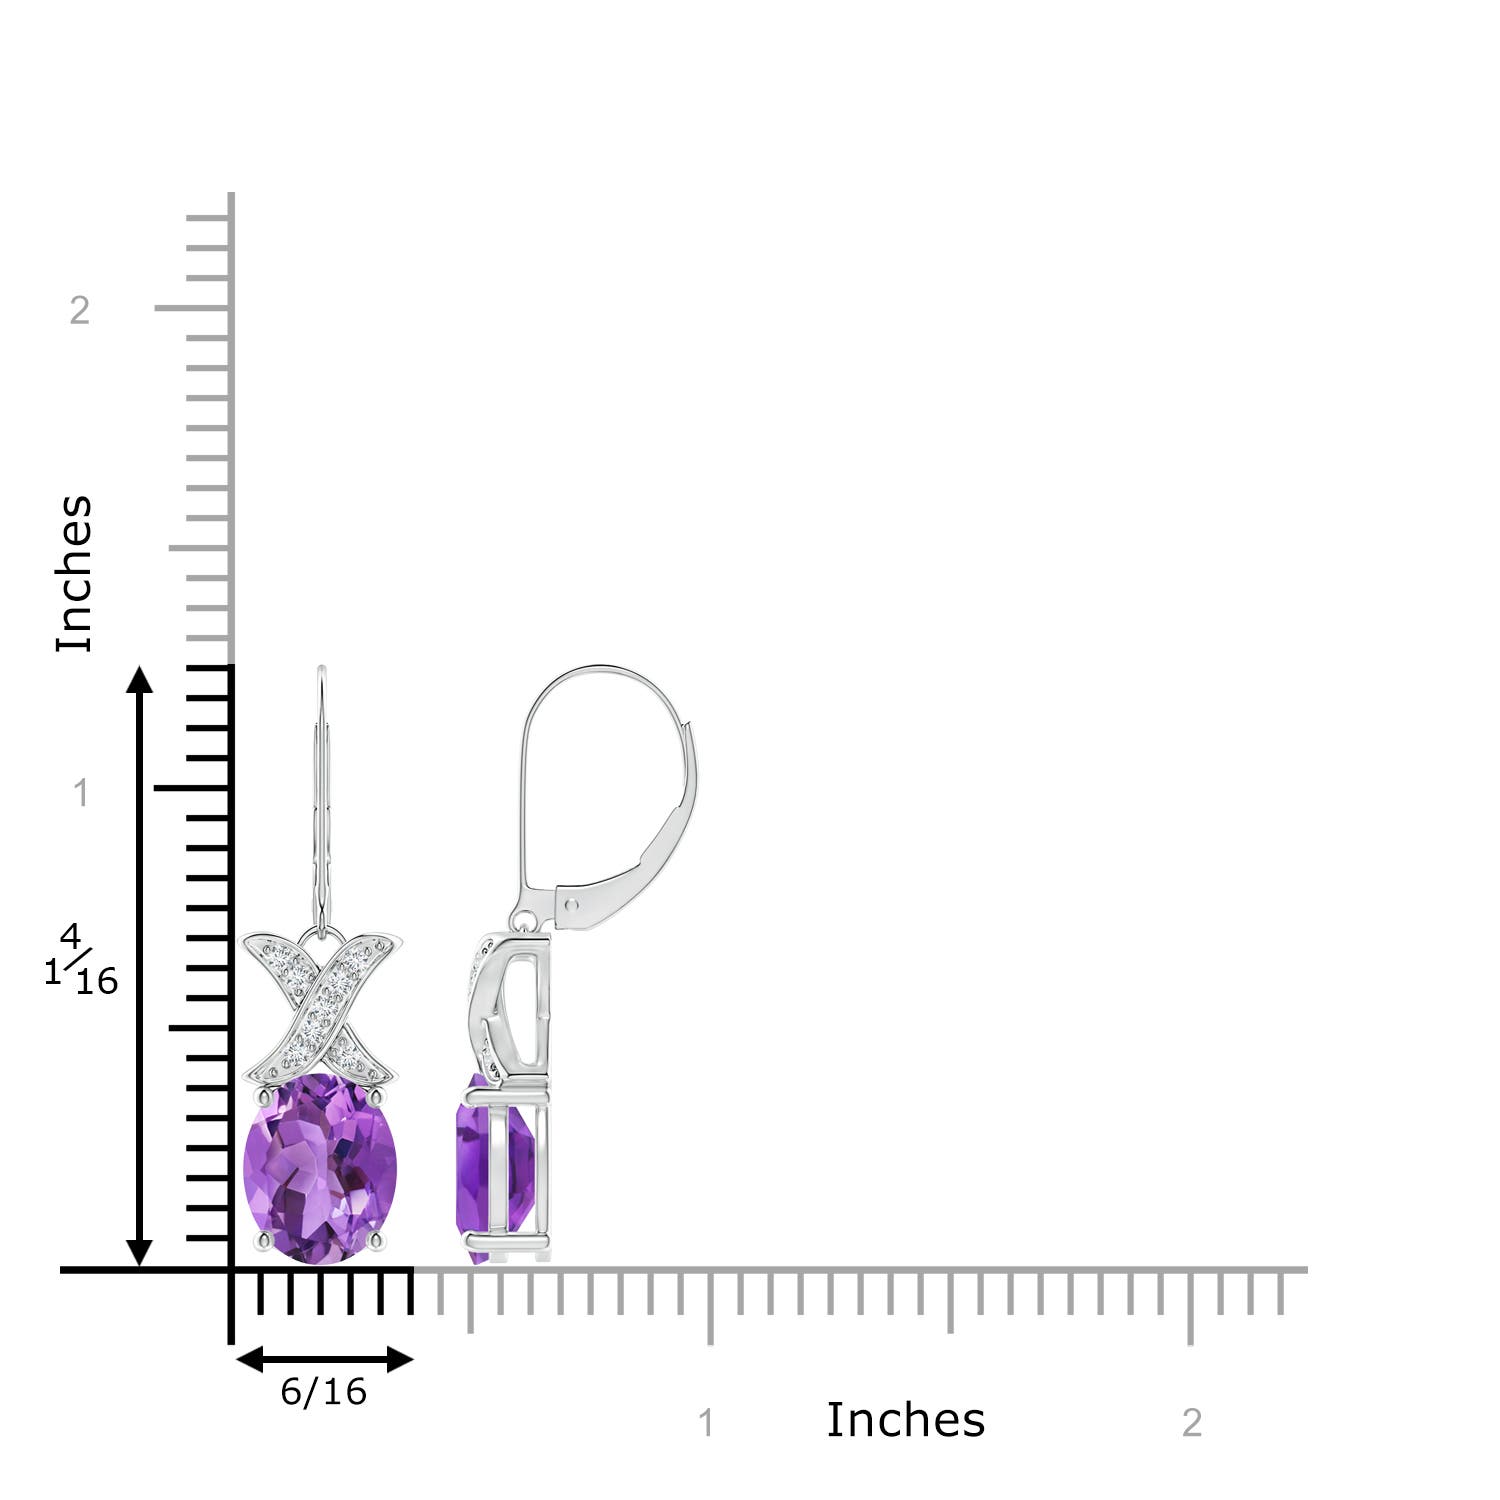 AA - Amethyst / 4.69 CT / 14 KT White Gold